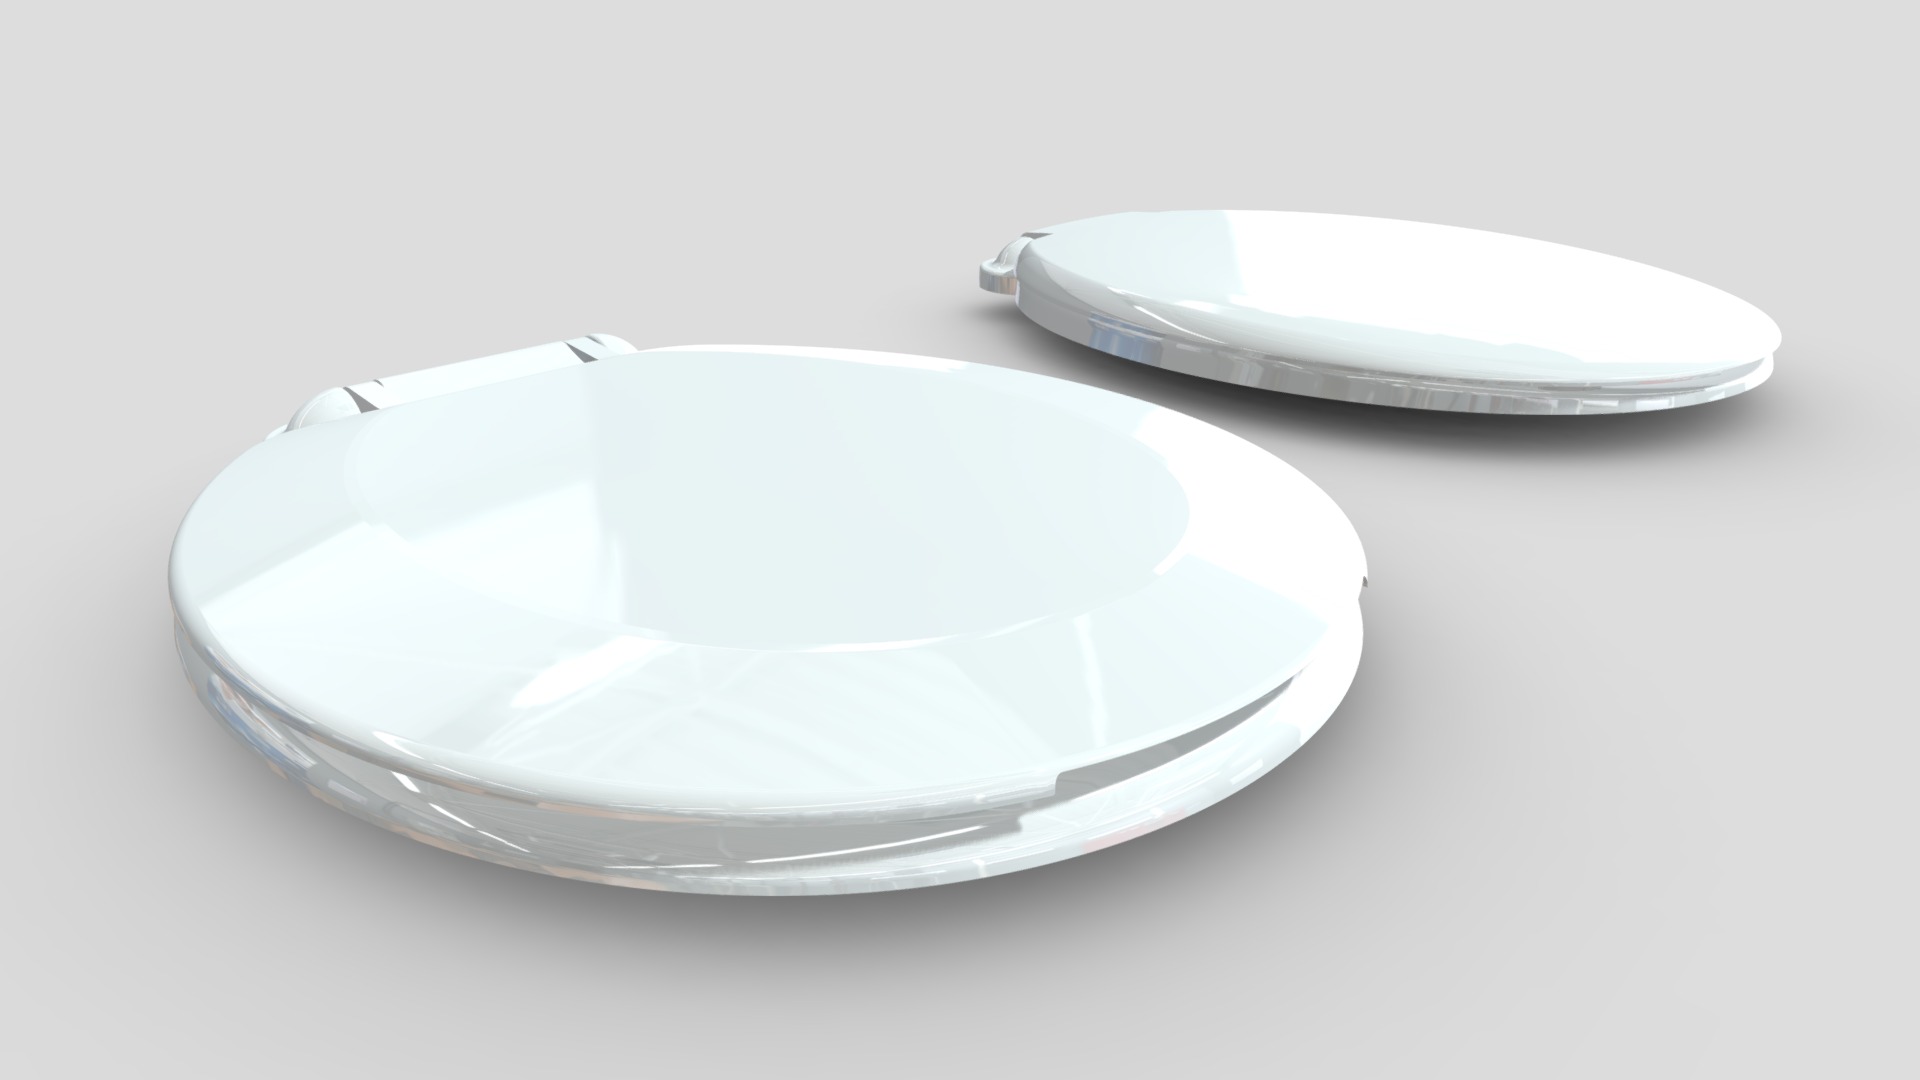 3D model Toilet Lid 2 Models - This is a 3D model of the Toilet Lid 2 Models. The 3D model is about a white plate with a silver plate.